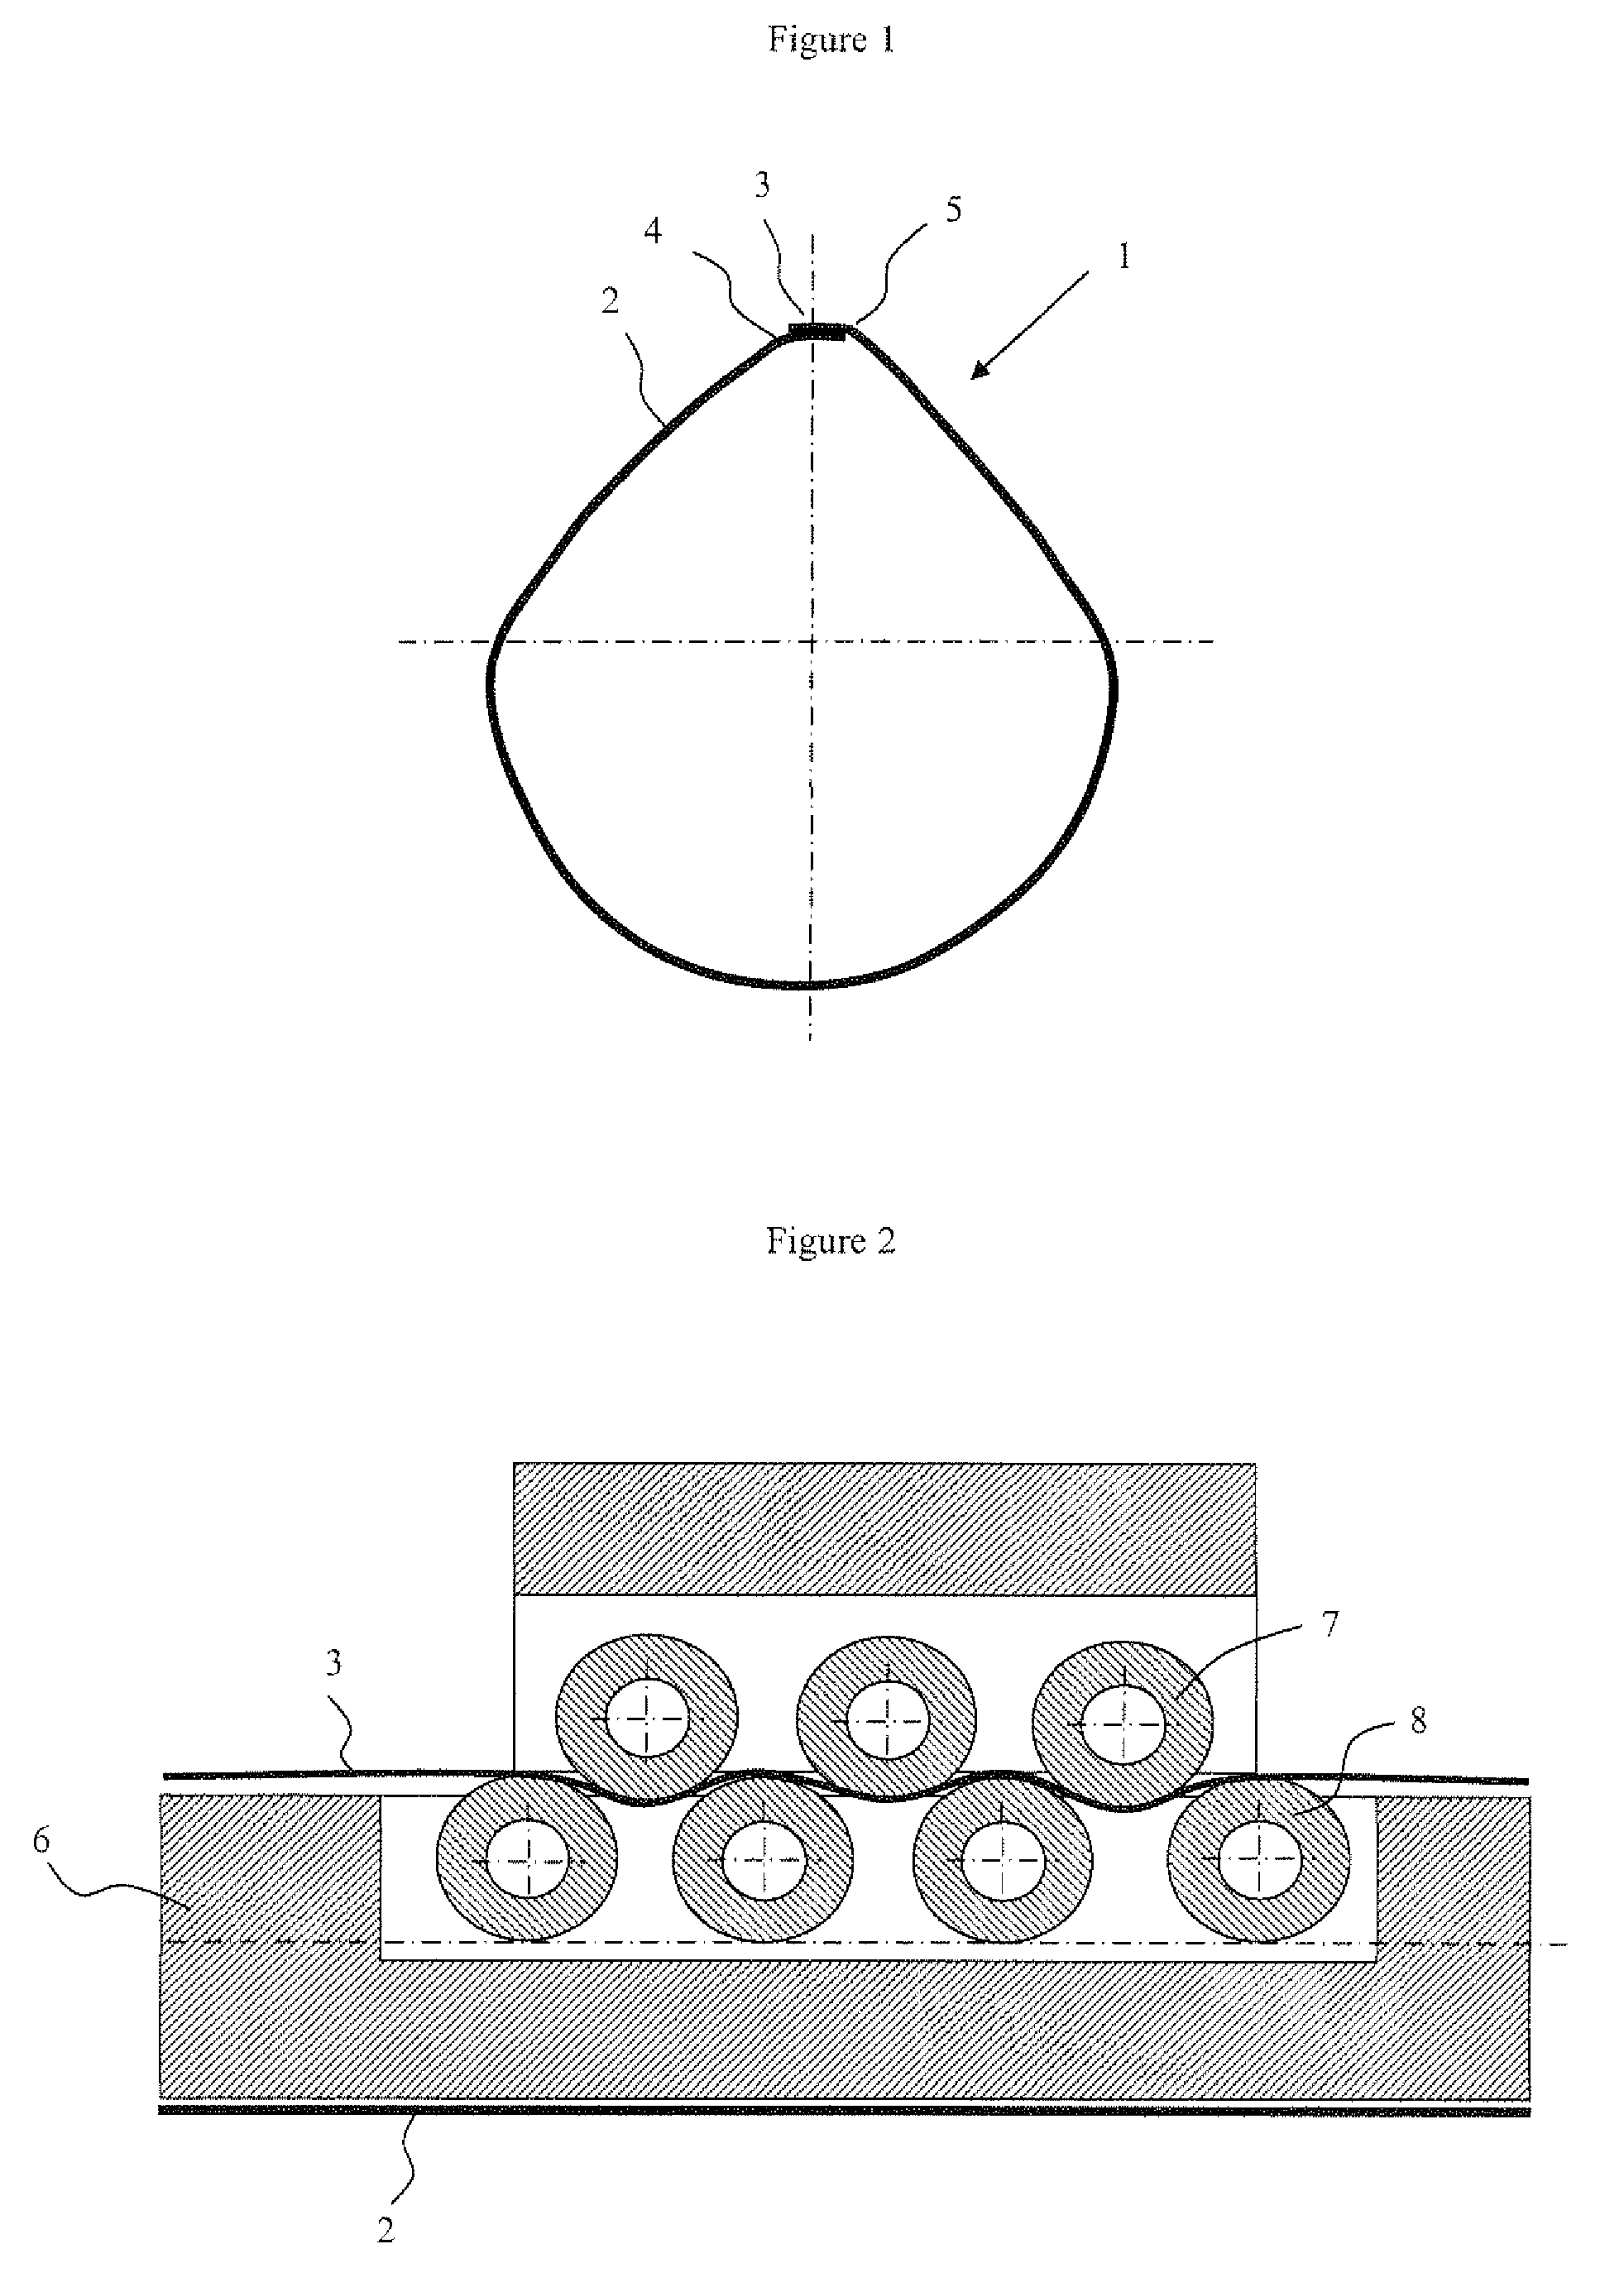 Method for manufacturing tubes by welding